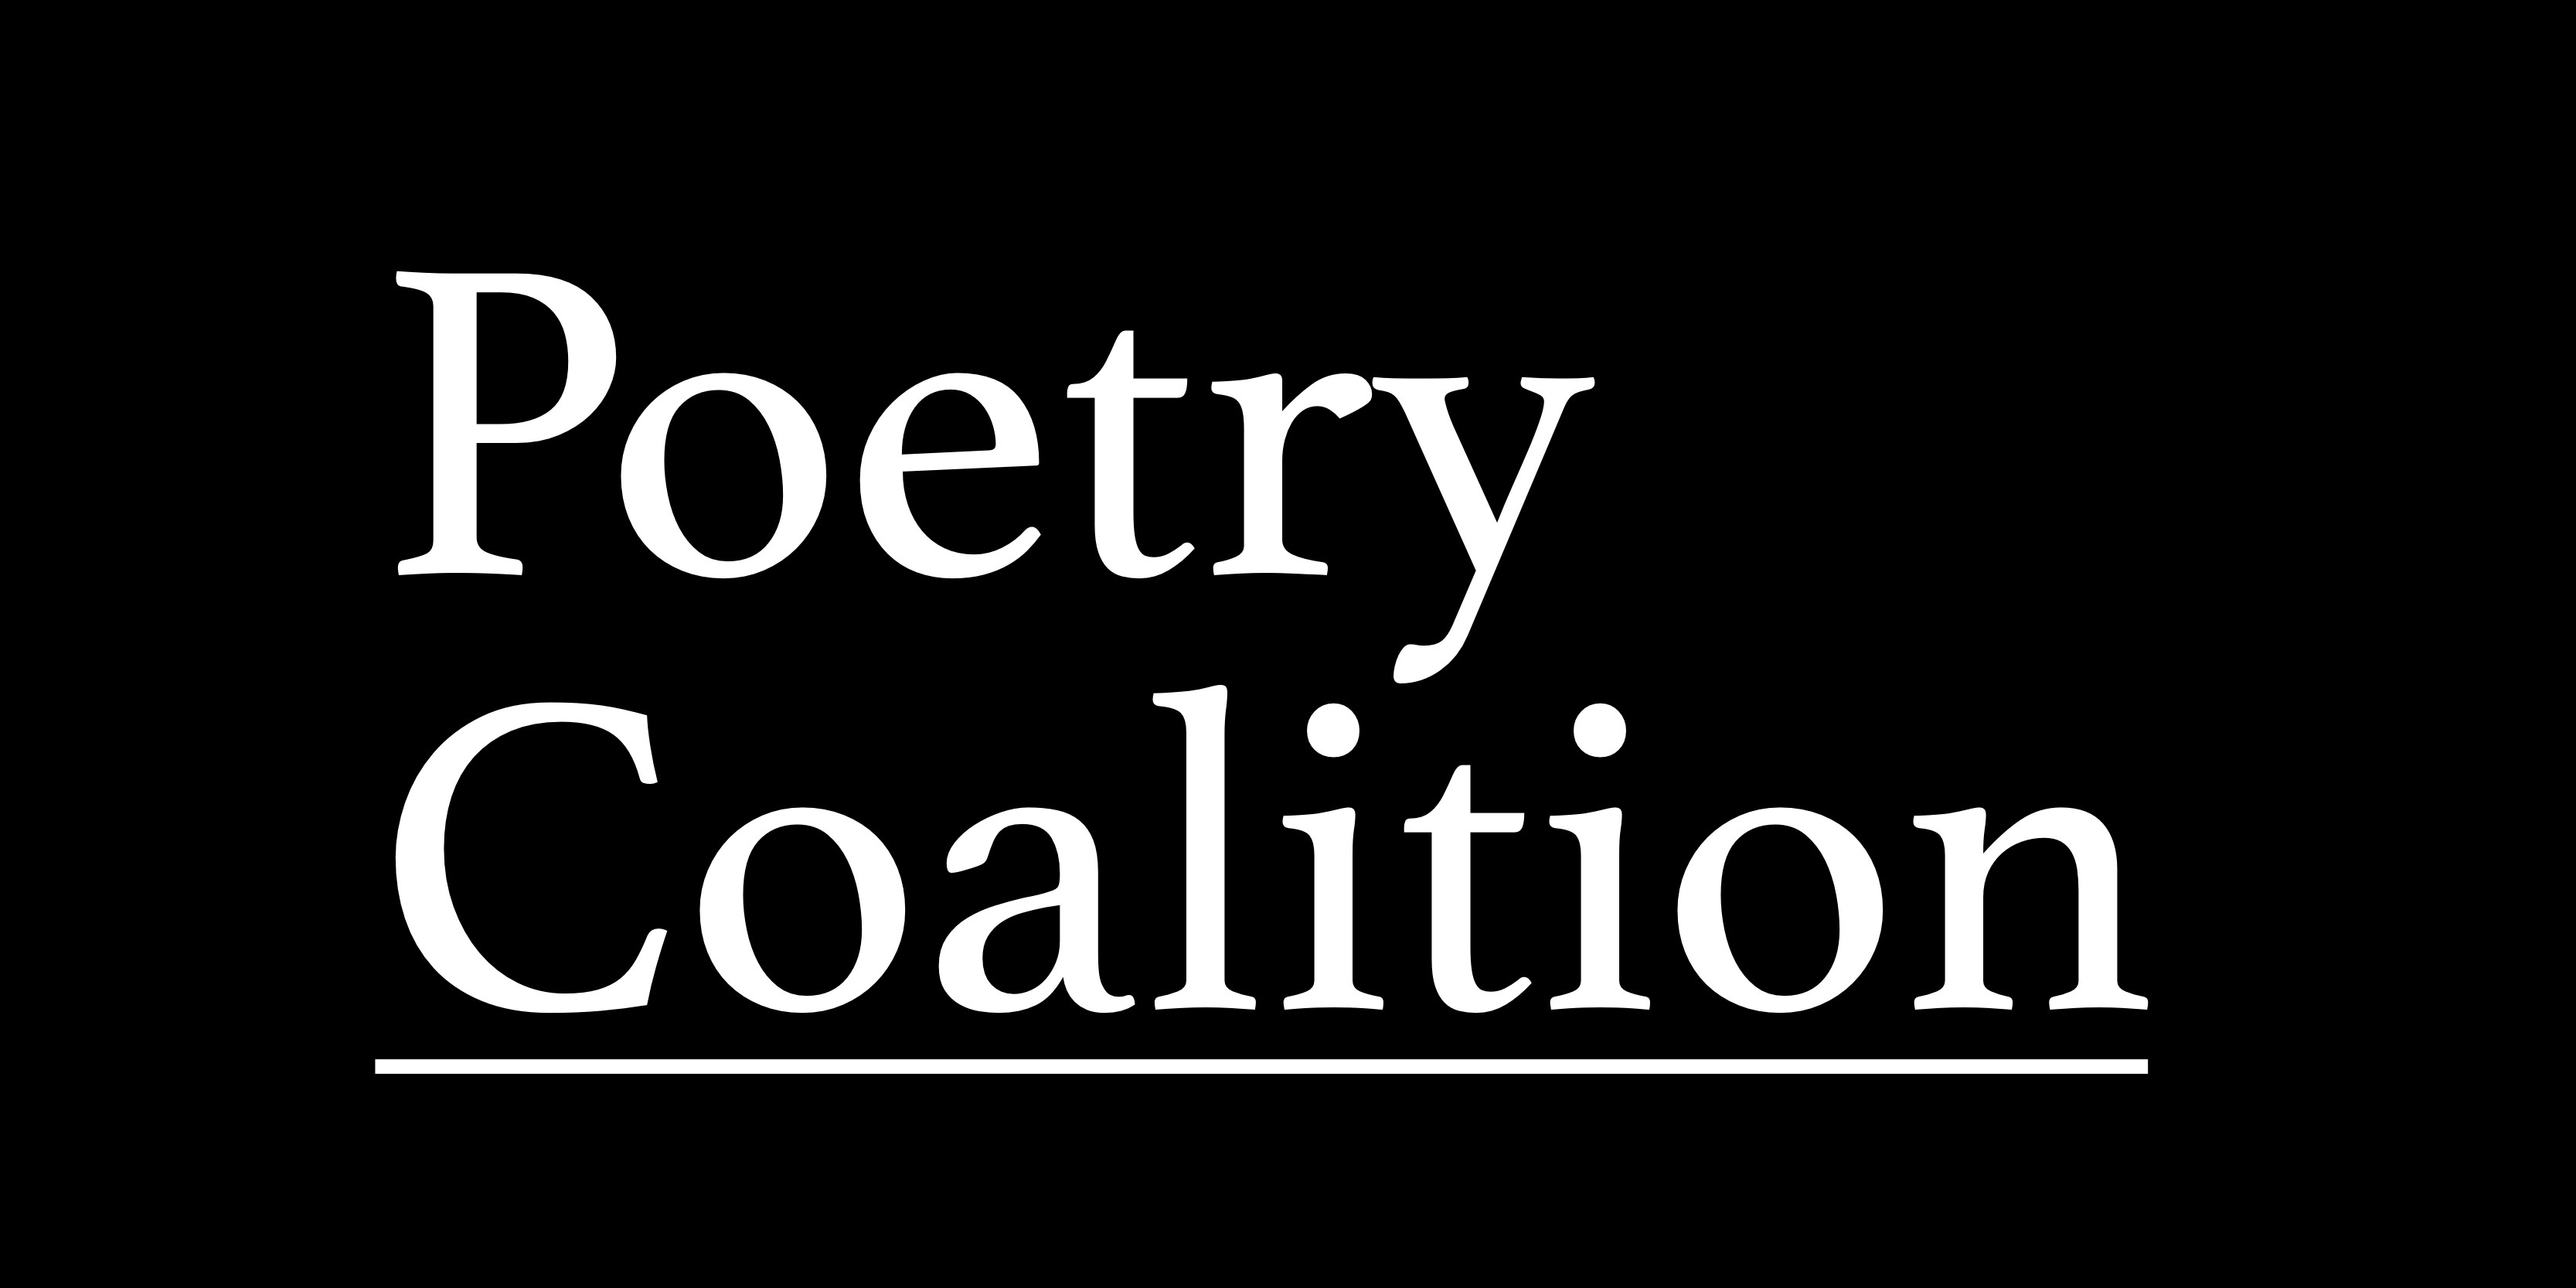 Supported by the Academy of American Poets with funds from The Andrew W. Mellon Foundation. Logo